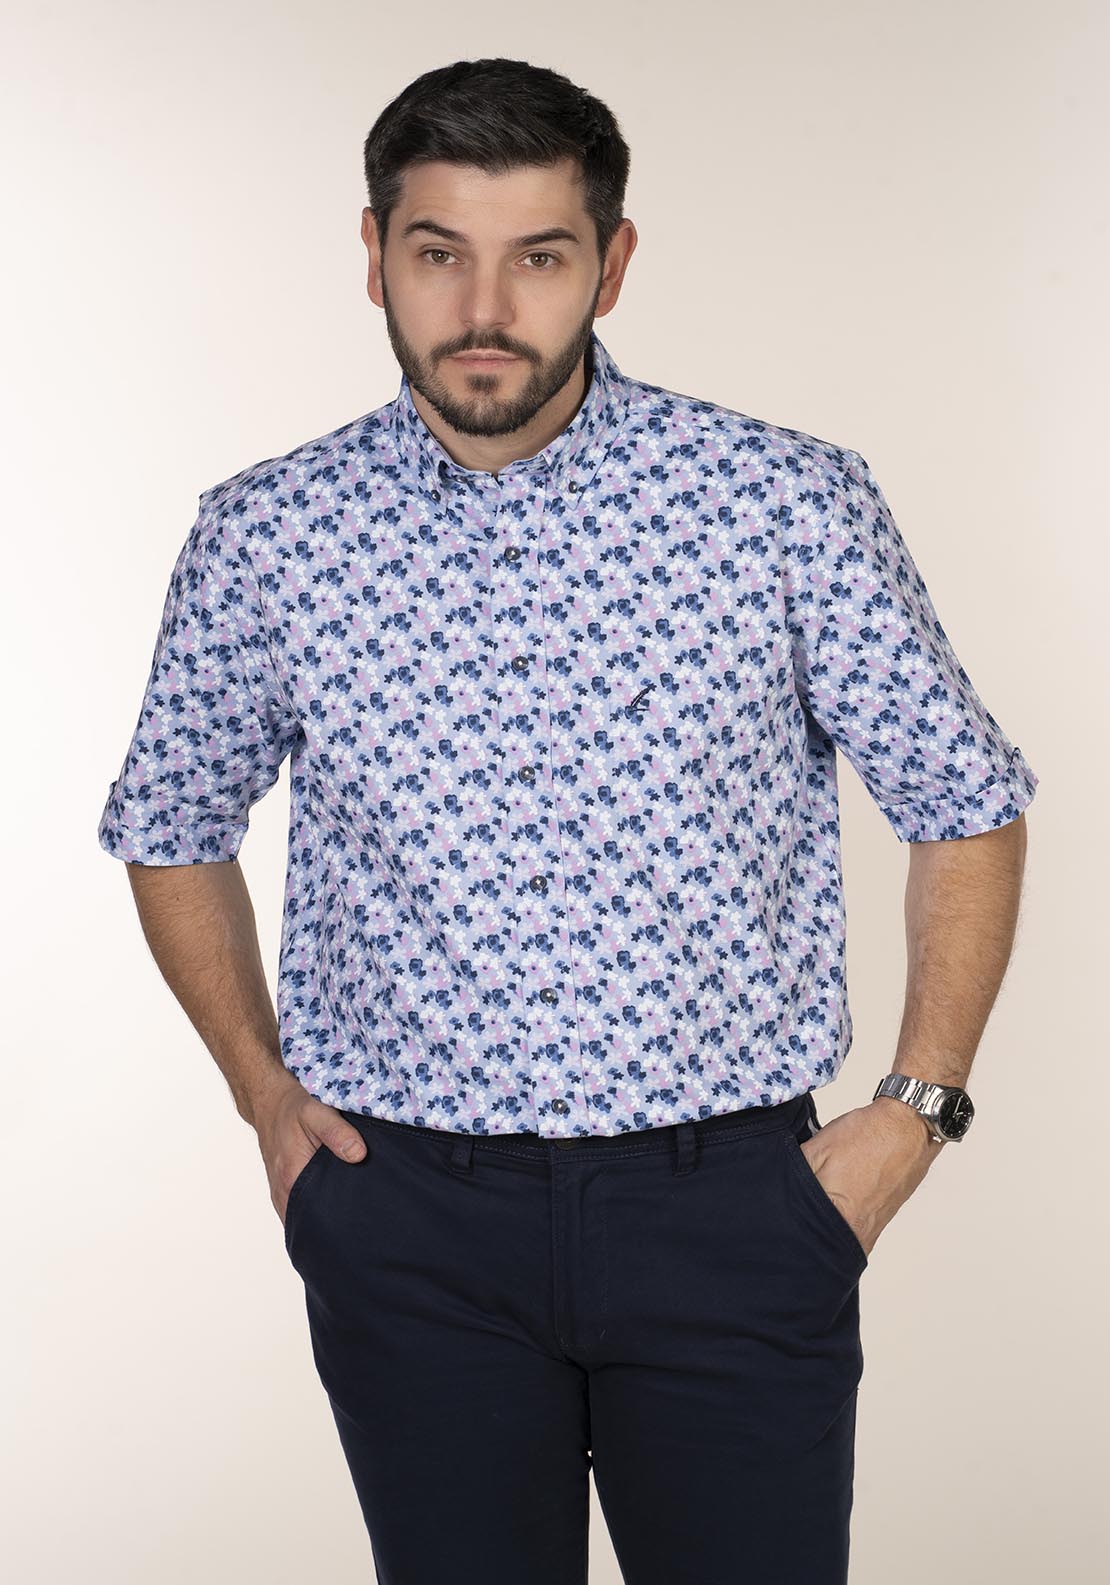 Yeats Casual Patterned Short Sleeve Shirt - Pink 1 Shaws Department Stores